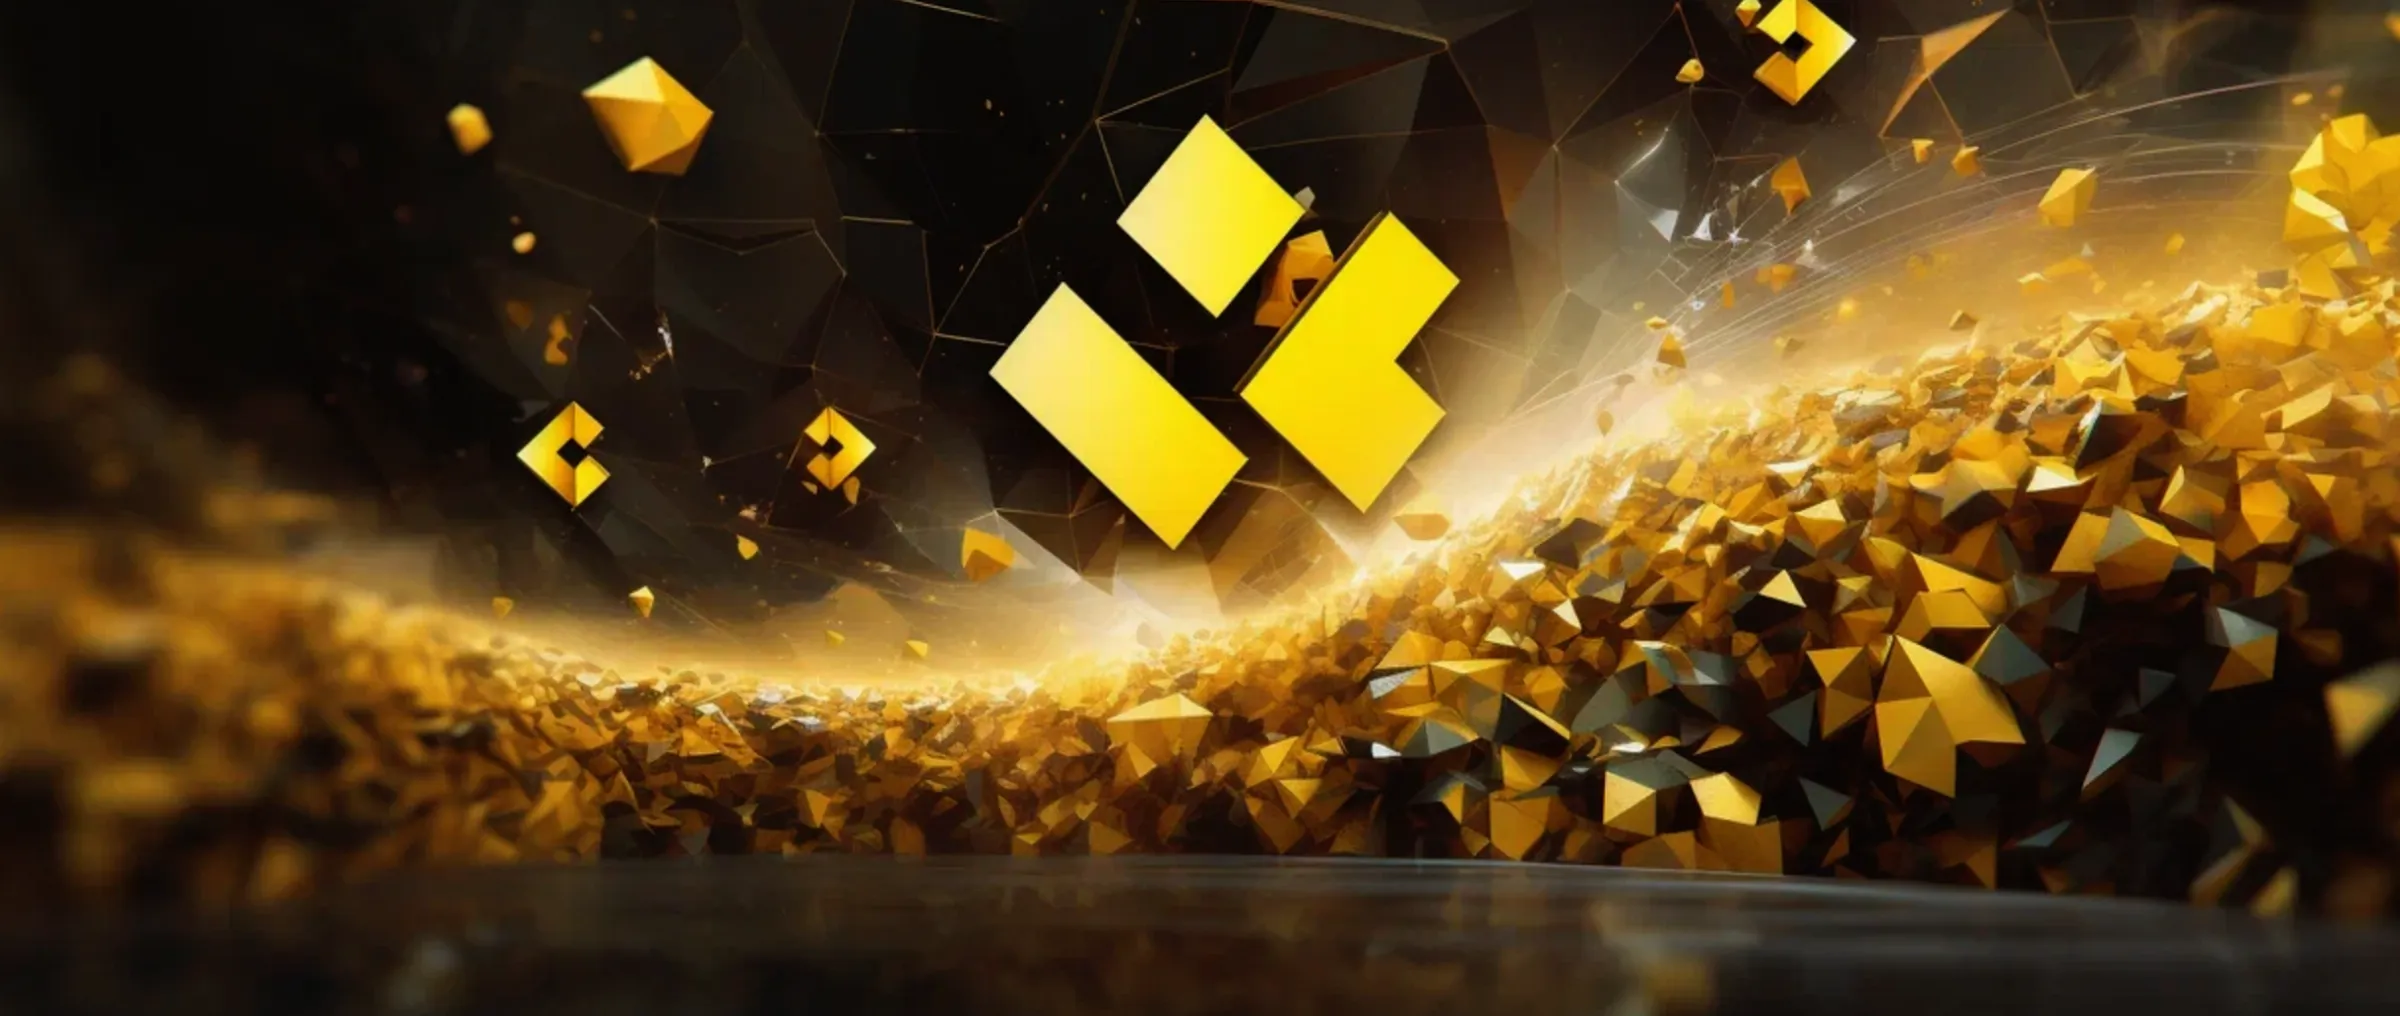 Binance Announces Collaboration with Meest Shopping Platform